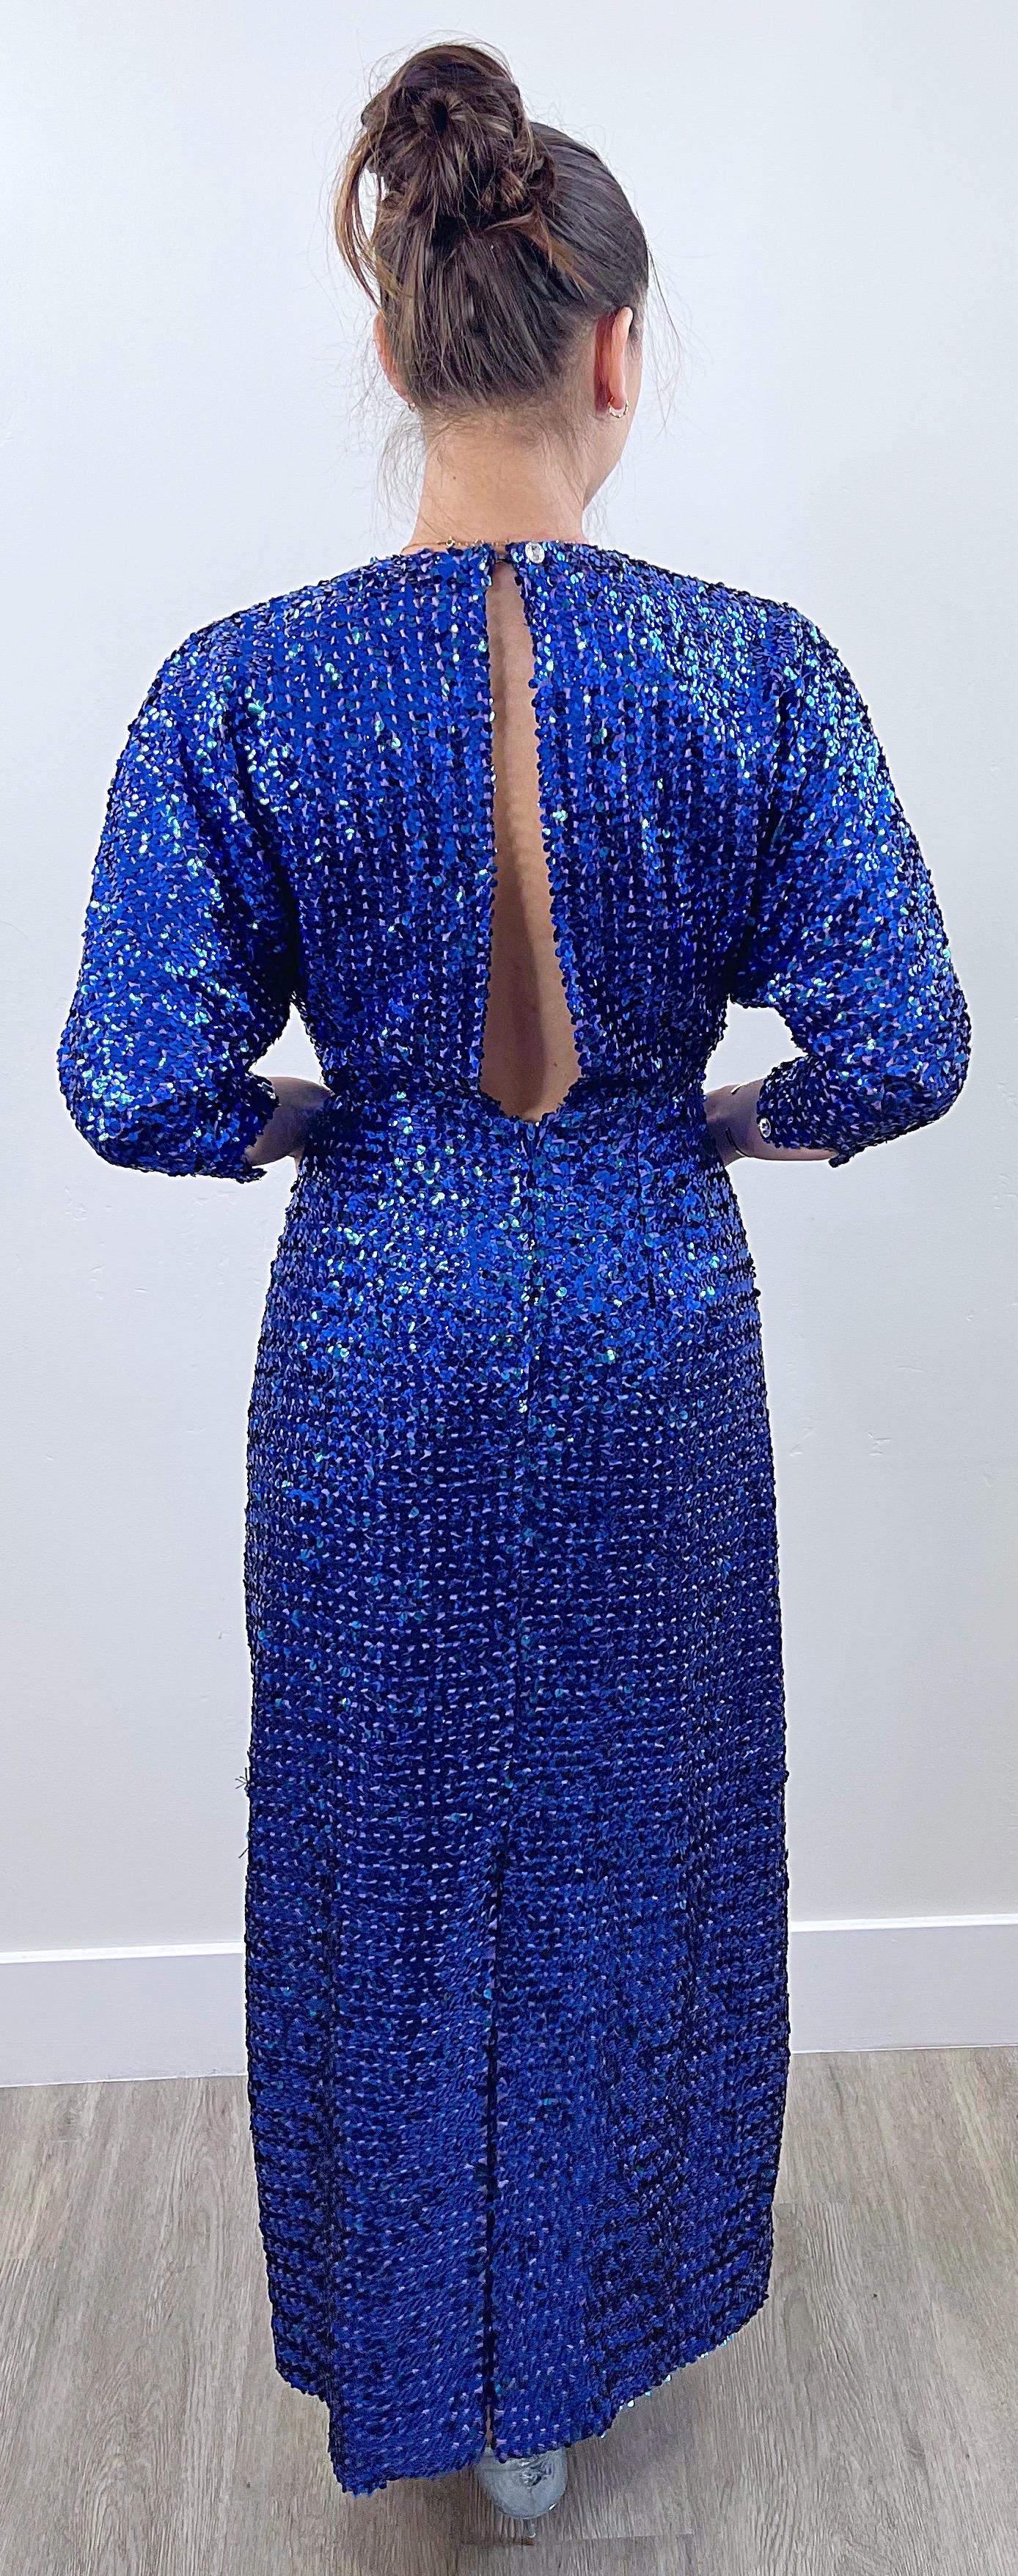 Beautiful 1970s royal blue fully sequined gown ! Features thousands of hand-sewn sequins throughout. Peek-a-boo back with hidden zipper and hook-and-eye closures. Rhinestone buttons at each sleeve cuff. Dolman sleeves can accommodate an array of